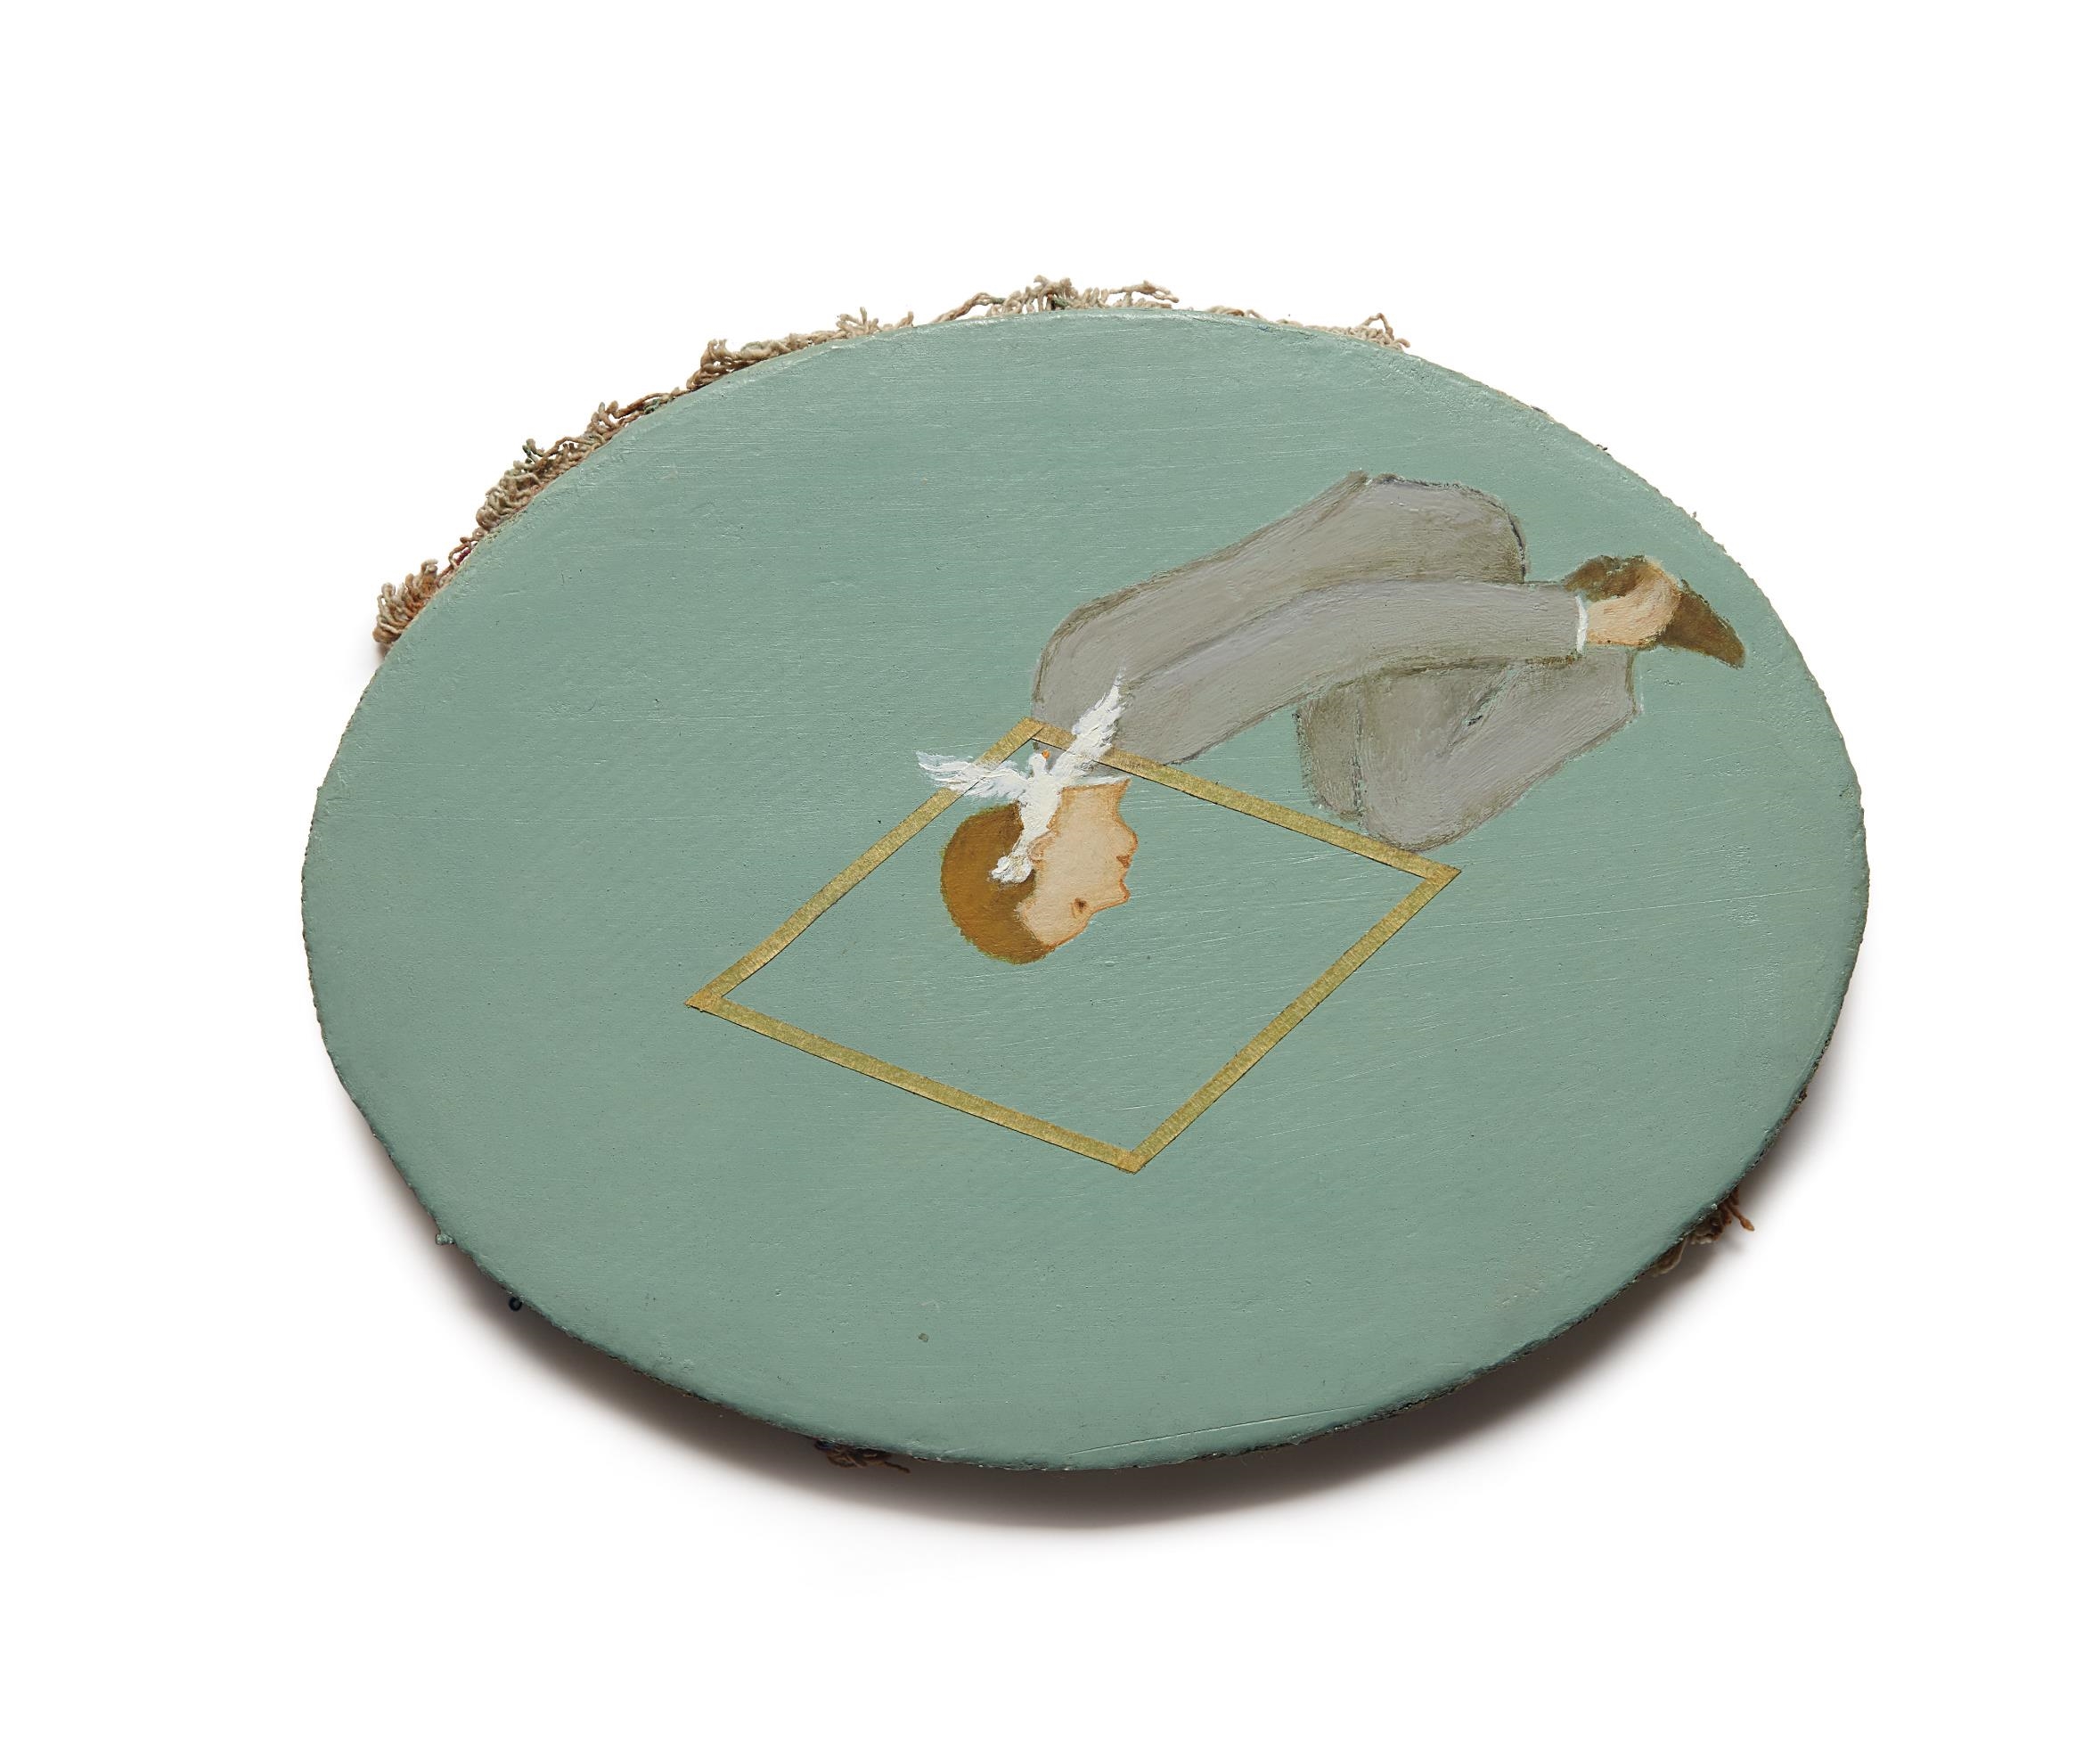 Untitled by Francis Alÿs, 1997